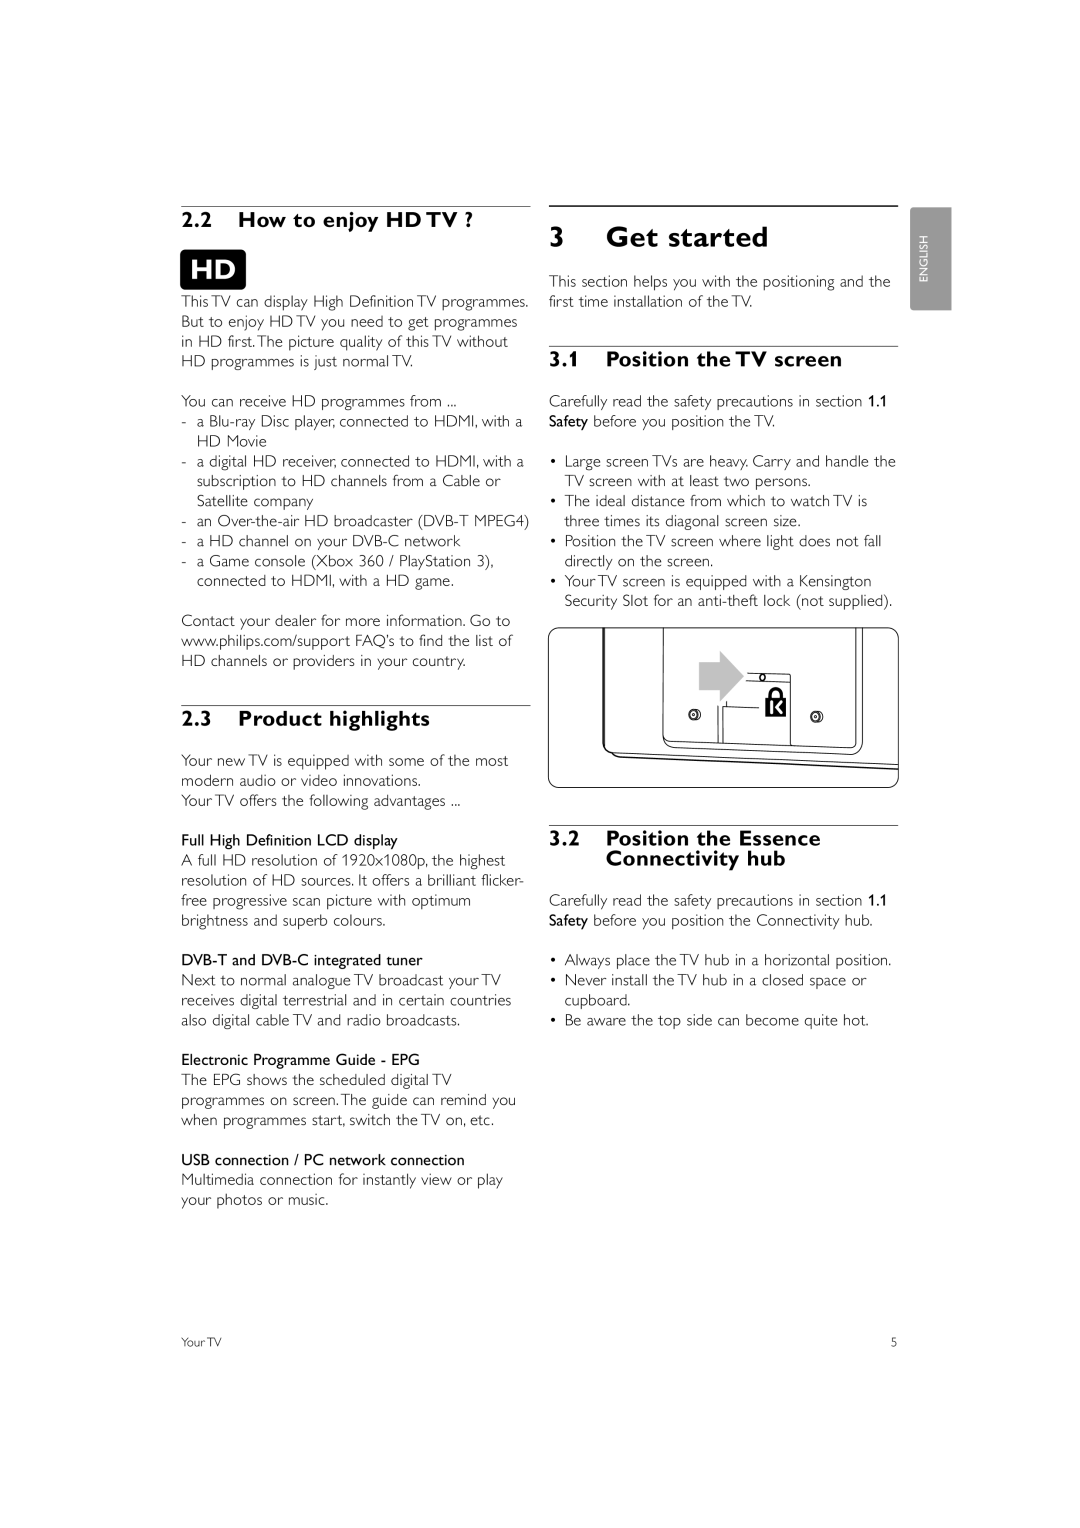 Philips 42PES0001D/H manual Get started, How to enjoy HD TV ?, Product highlights, Position the TV screen 